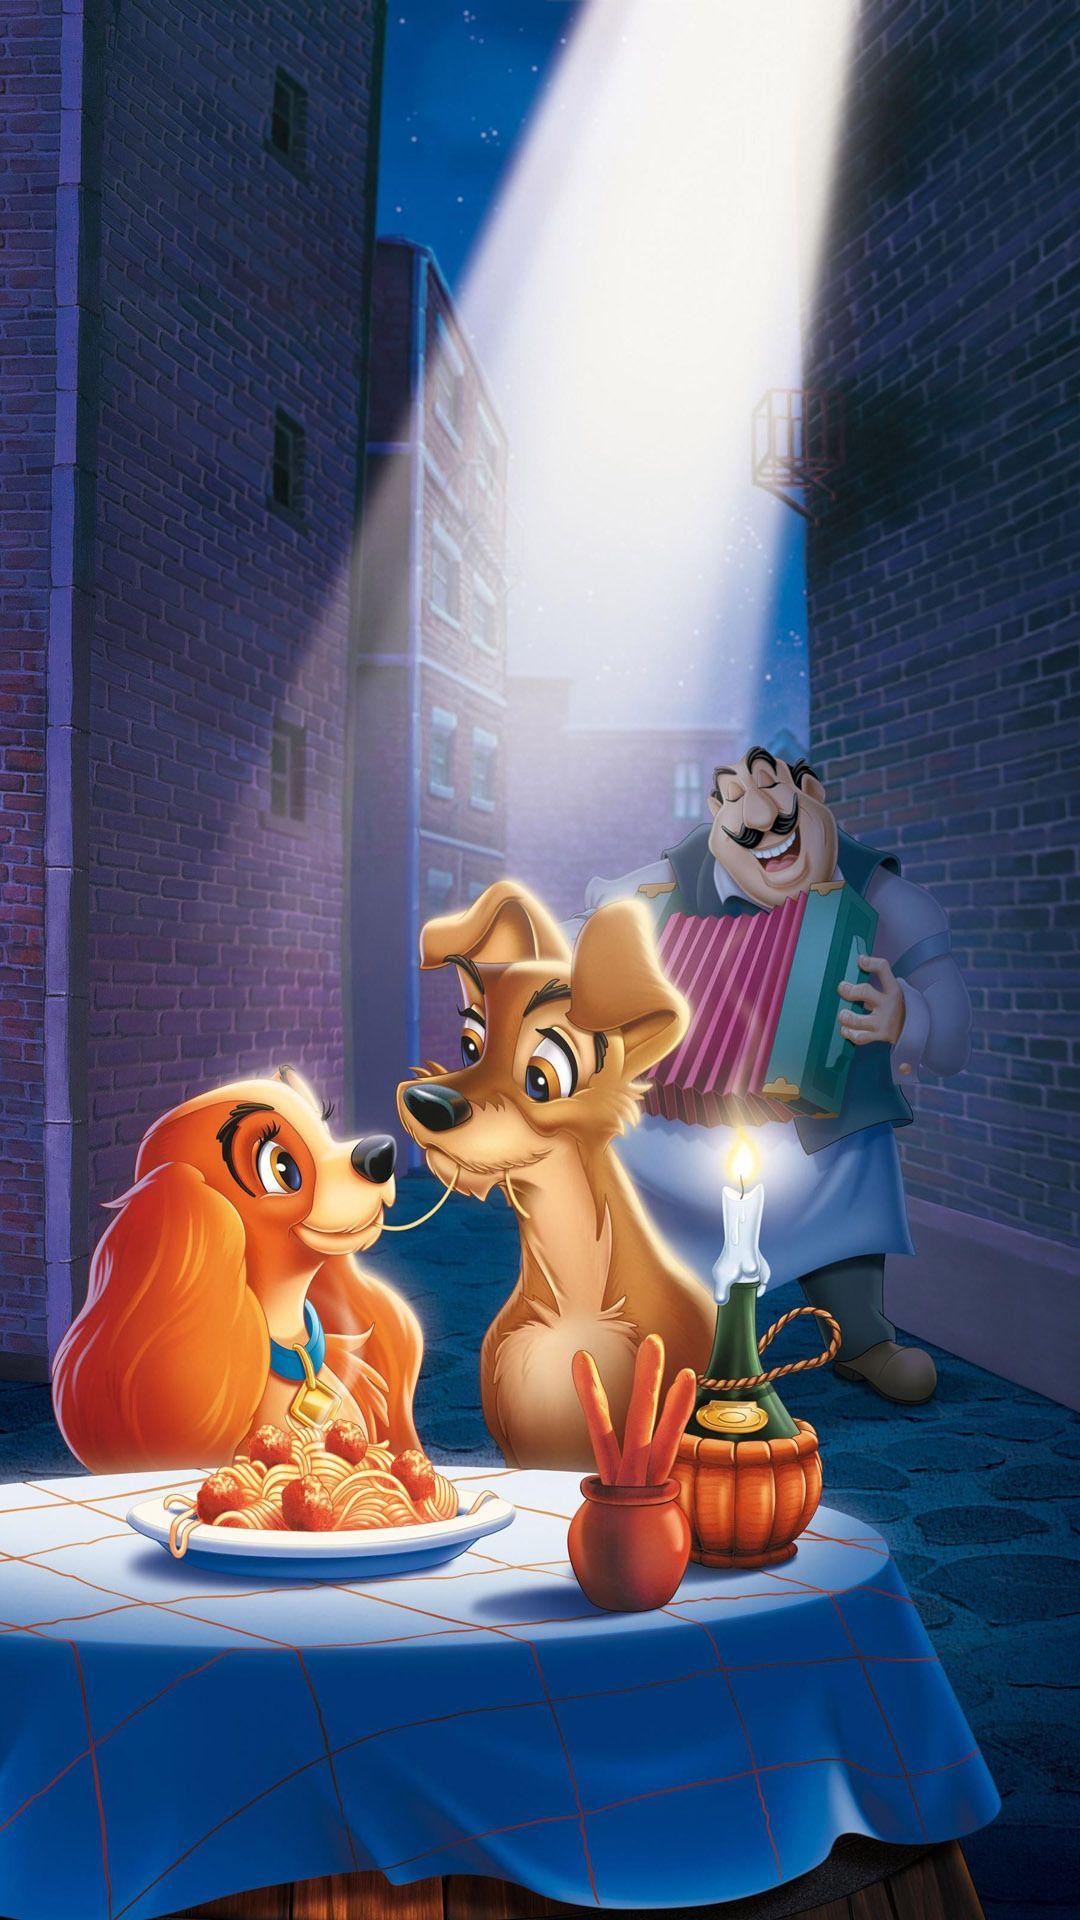 Lady and the Tramp Mobile Wallpaper 12595